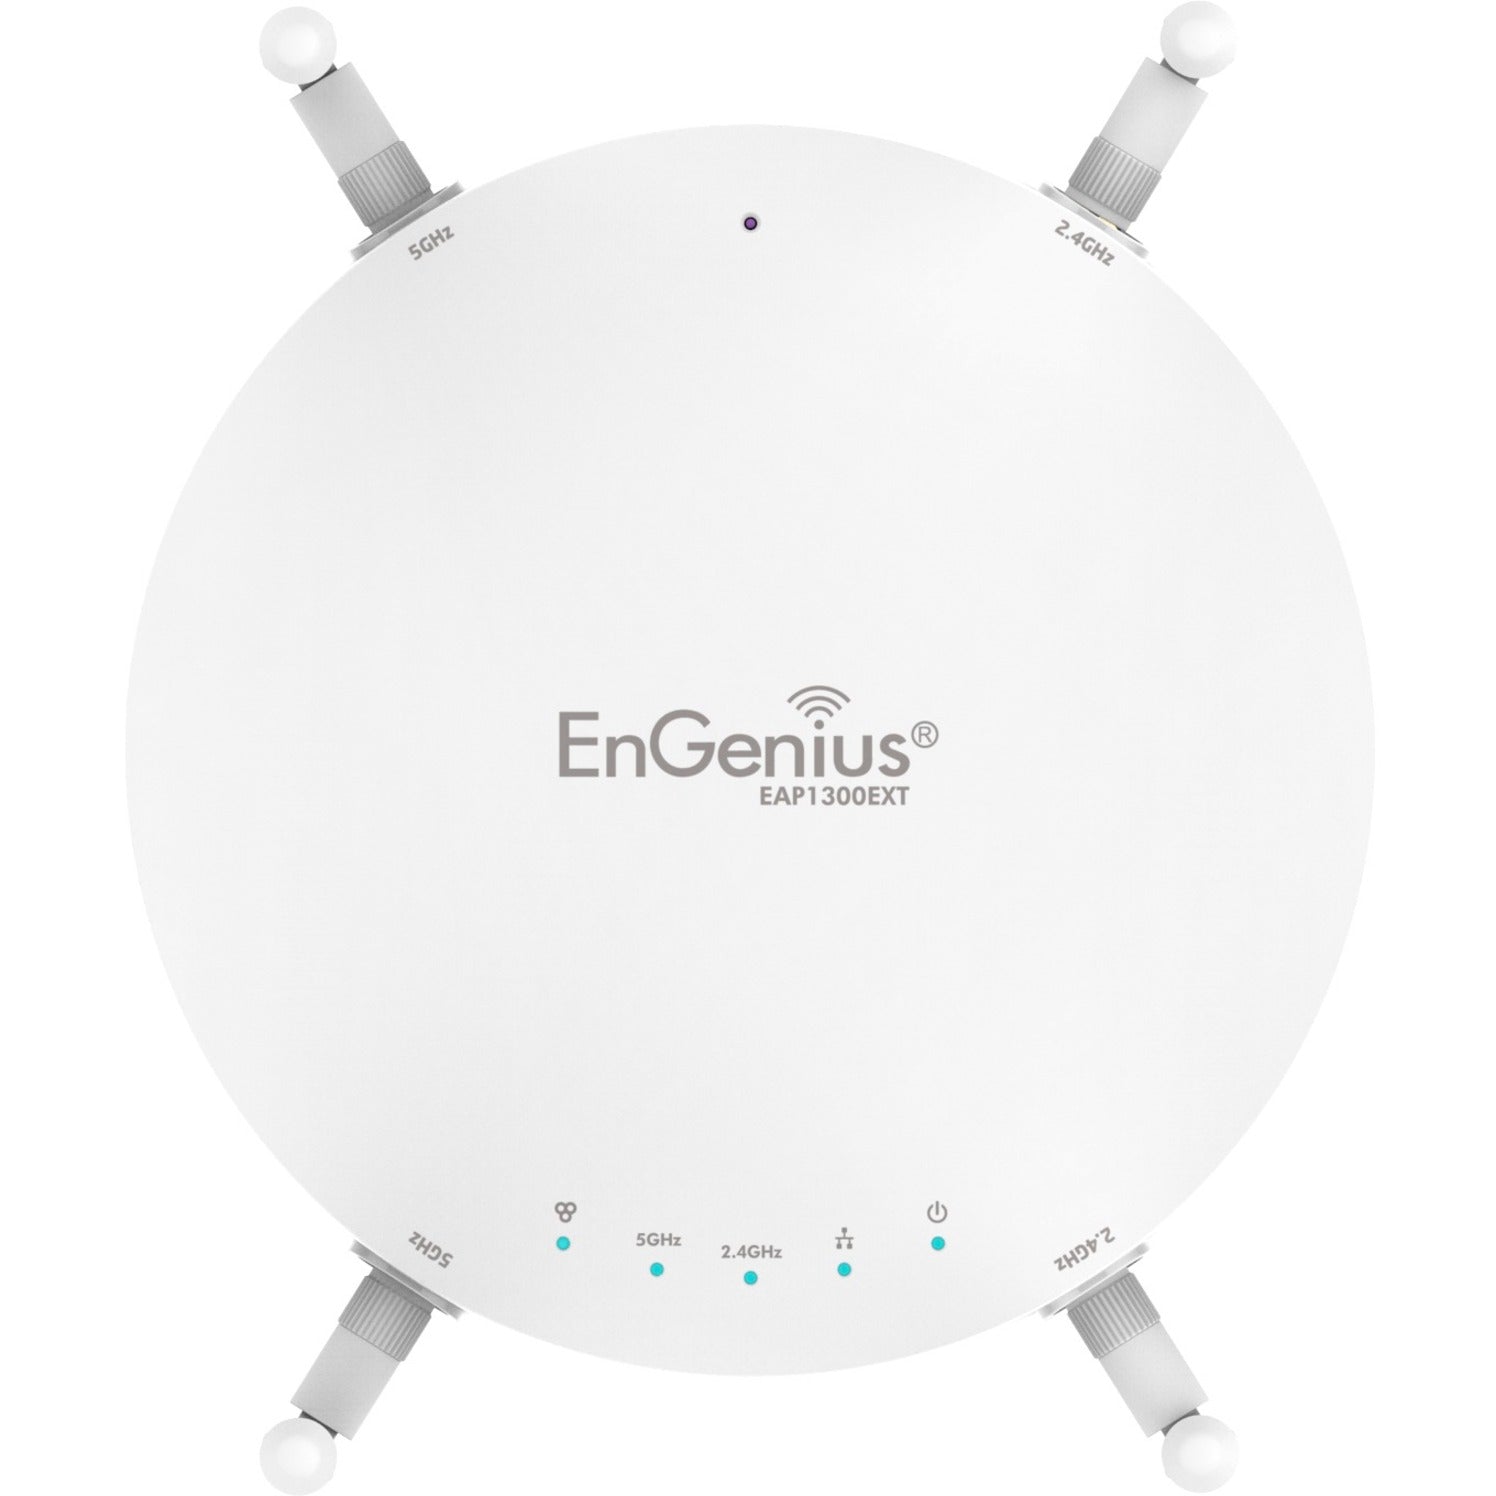 EnGenius EAP1300EXT EnTurbo Wireless Access Point, 802.11ac Wave 2 Indoor AP with High-gain Antennas